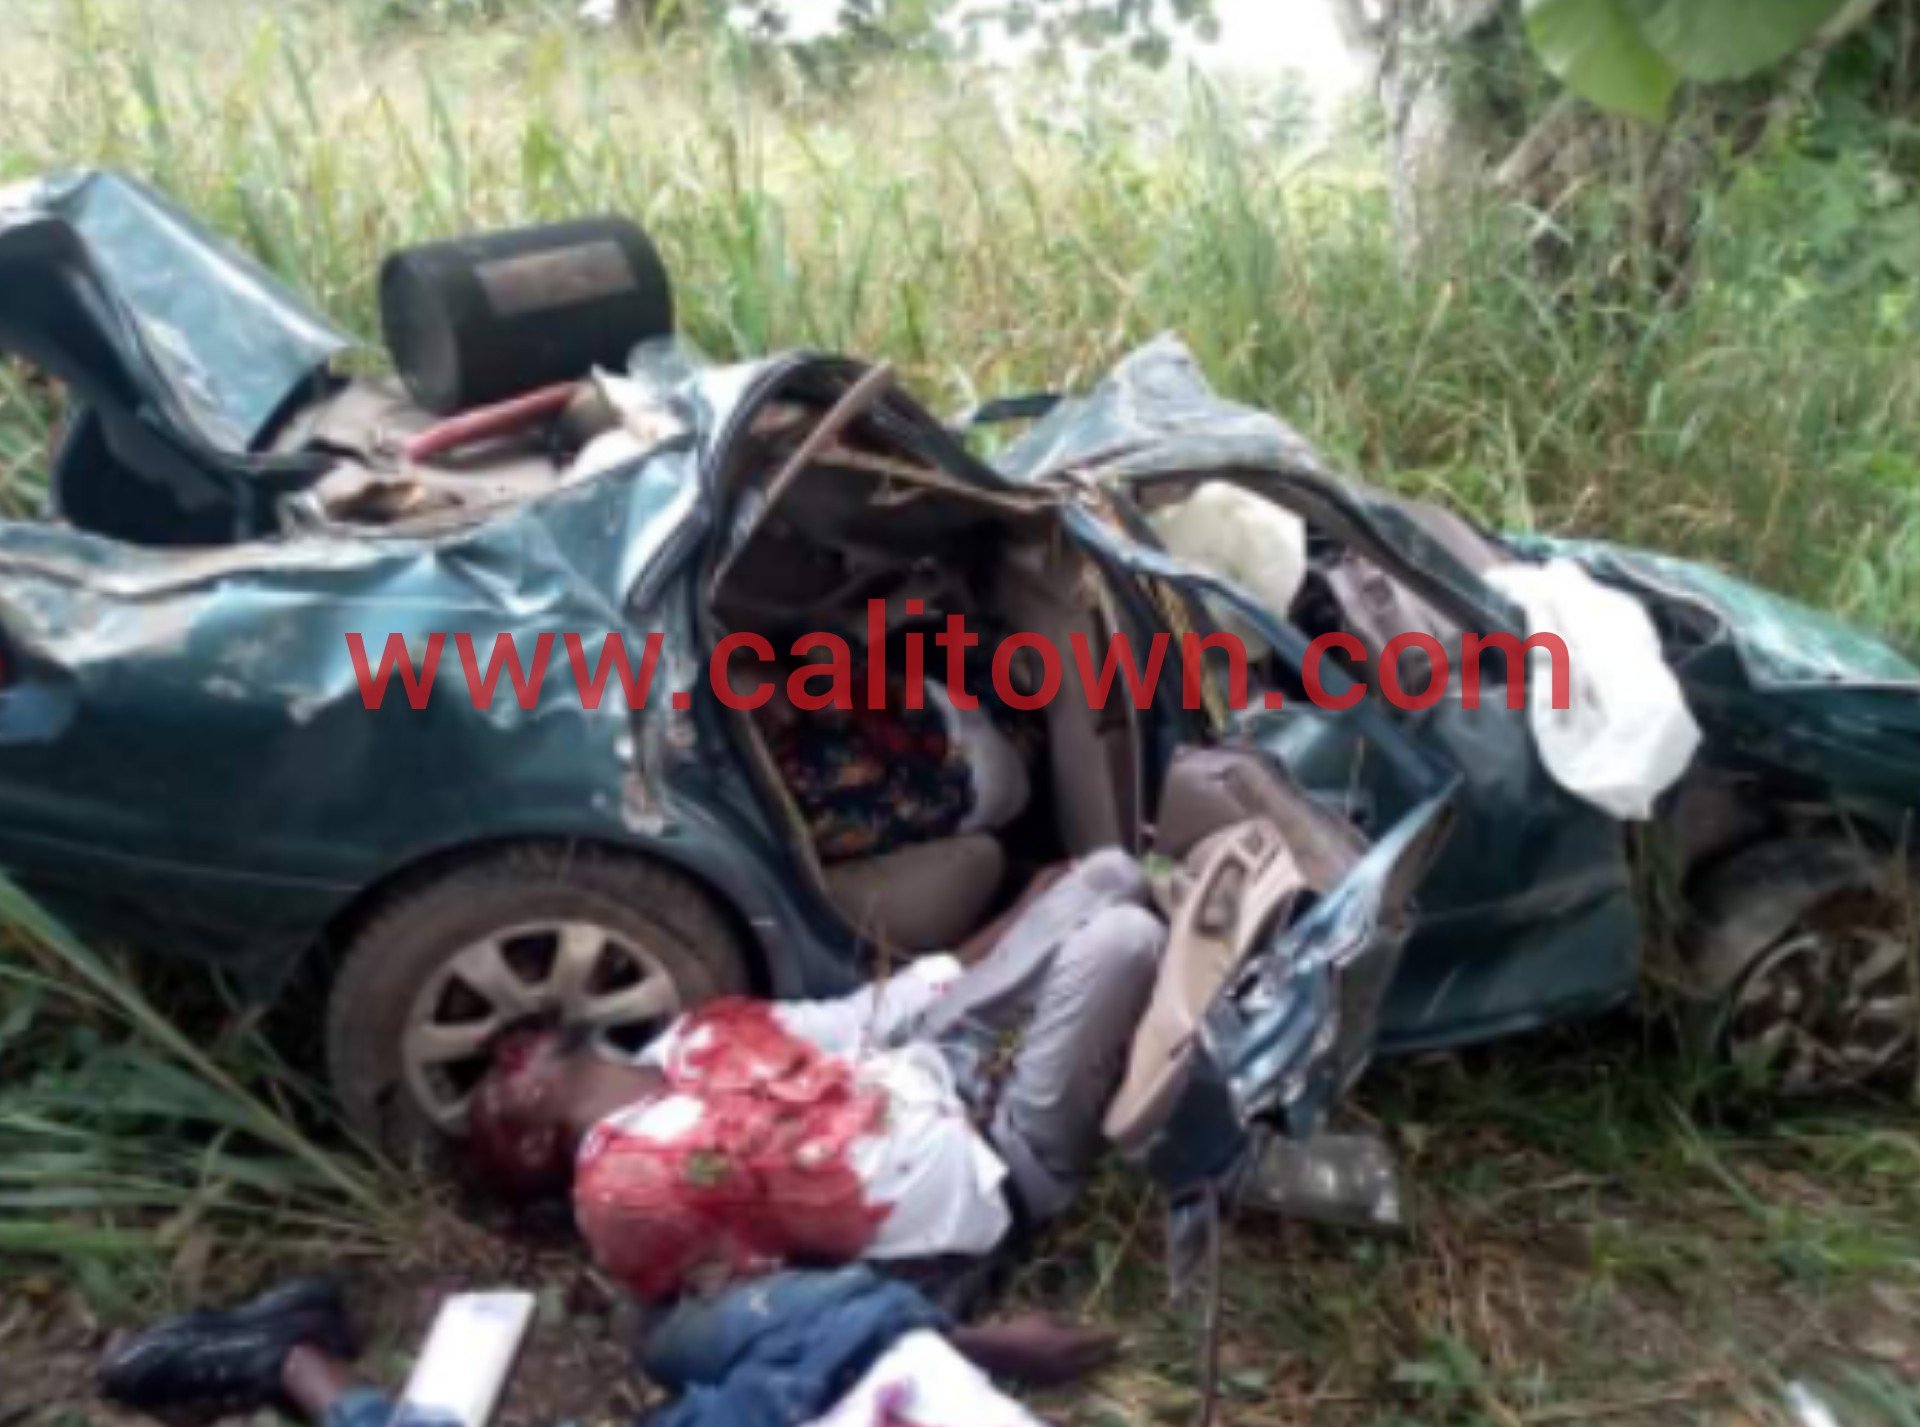 Son of Former House of Reps Member, Four Others Die In Ghastly Motor Accident